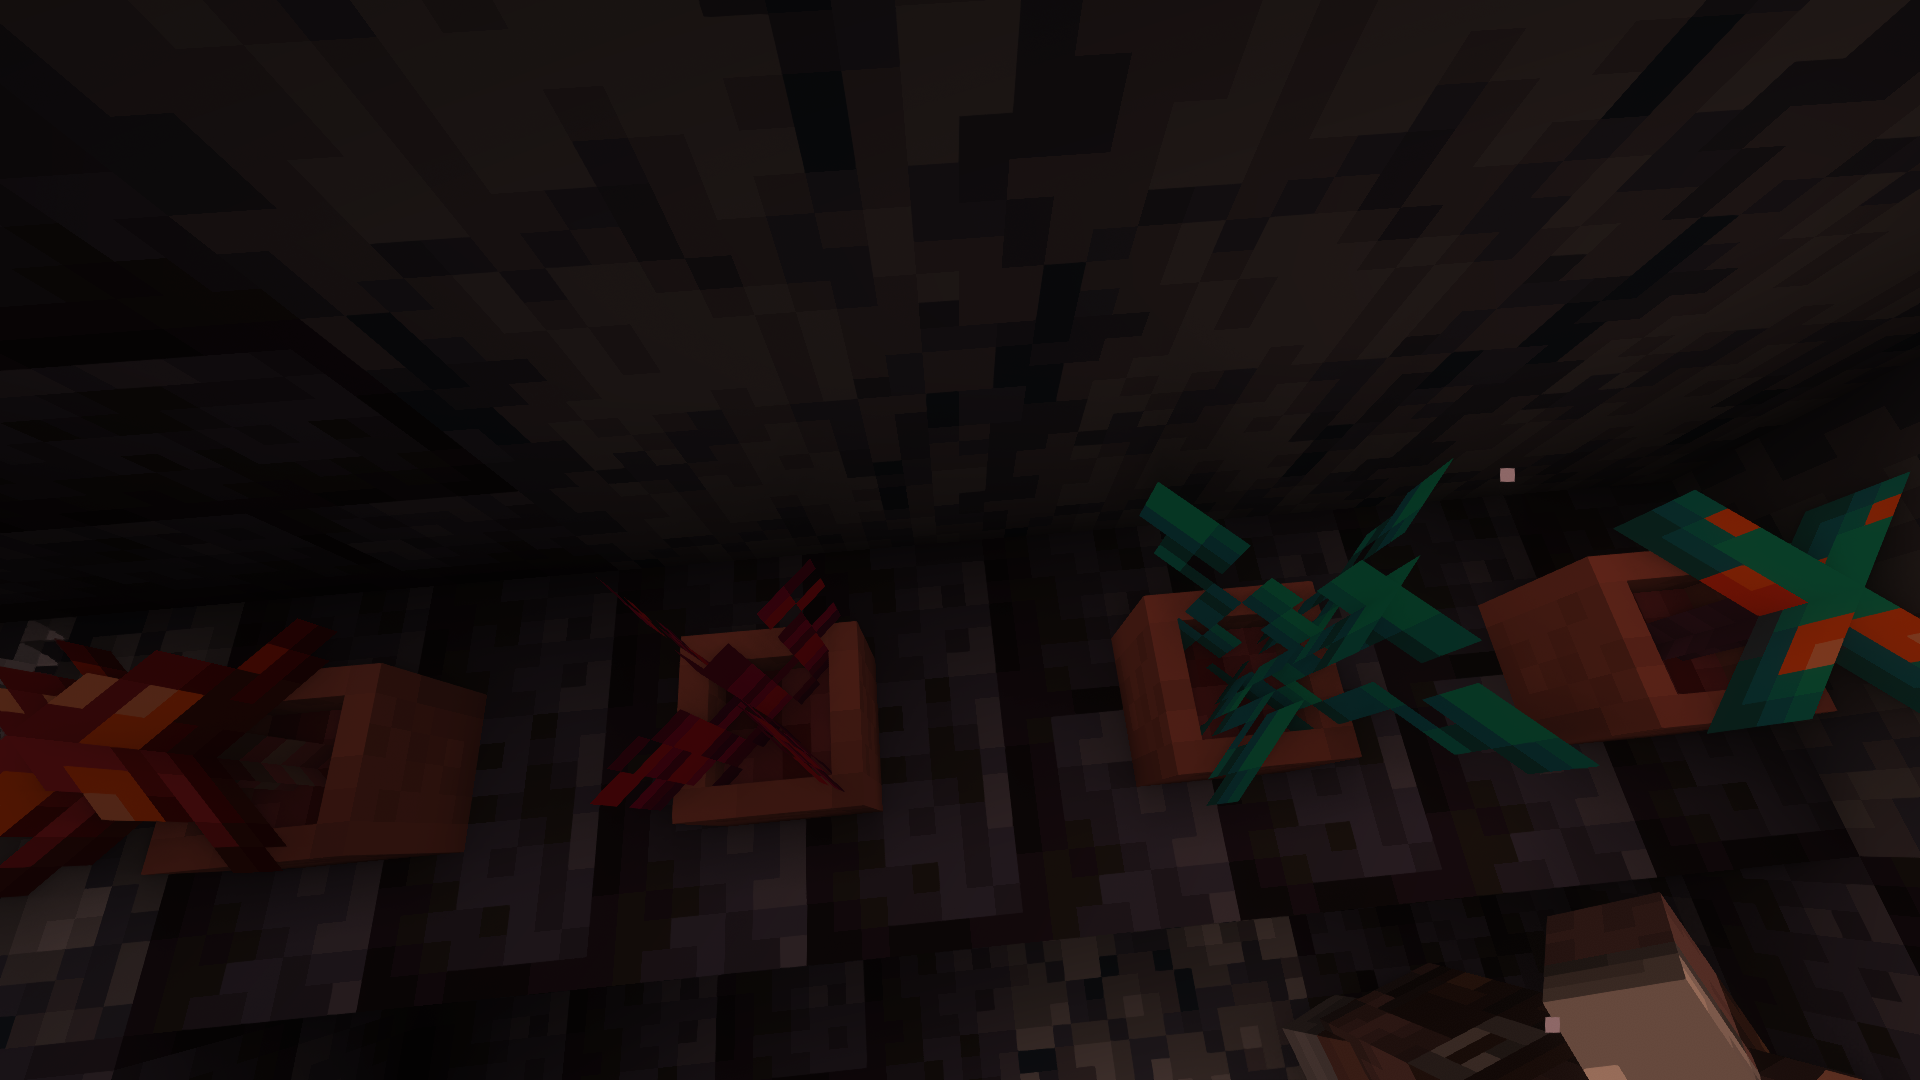 Fixed Nether Pots